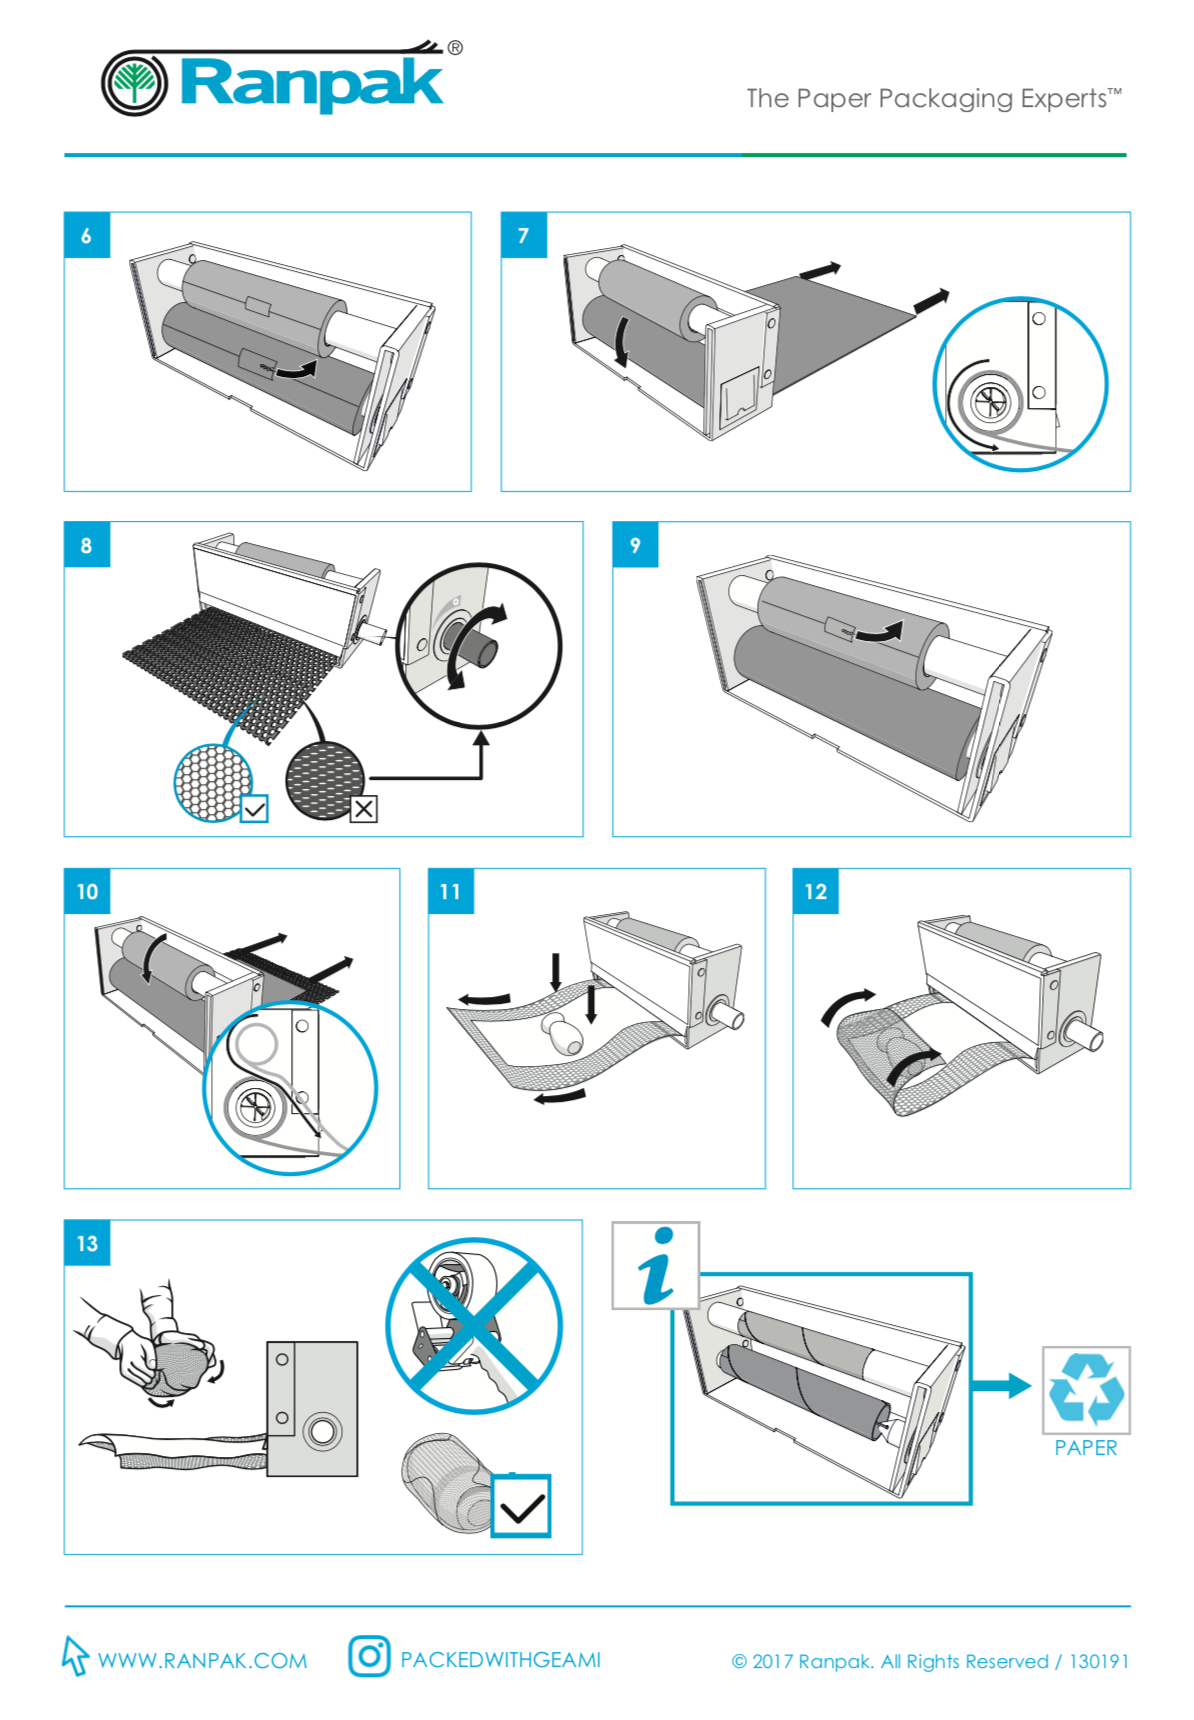 A quick start guide explaining the operation of a packaging machine without any text